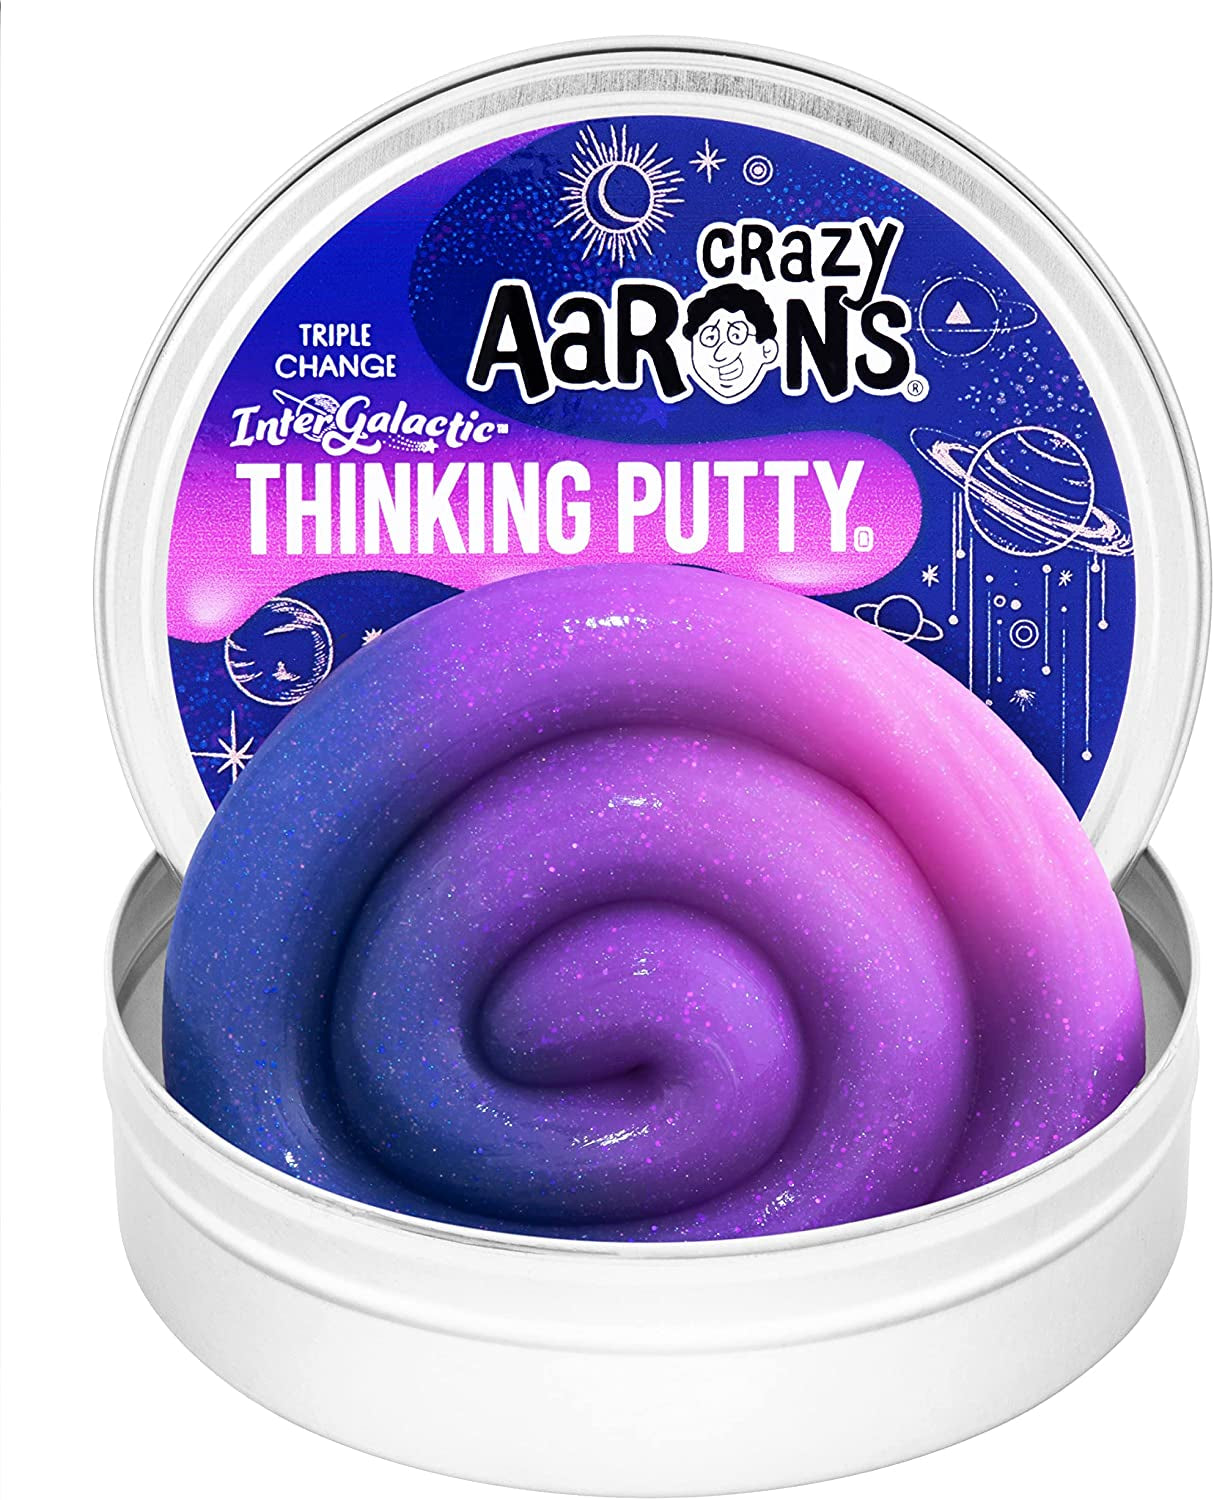 Goodnight Cactus Hypercolor® Thinking Putty® - 4" Tin Thinking Putty - Non-Toxic Sensory Play Putty - Never Dries Out - Creative Toy Fun for Ages 3+